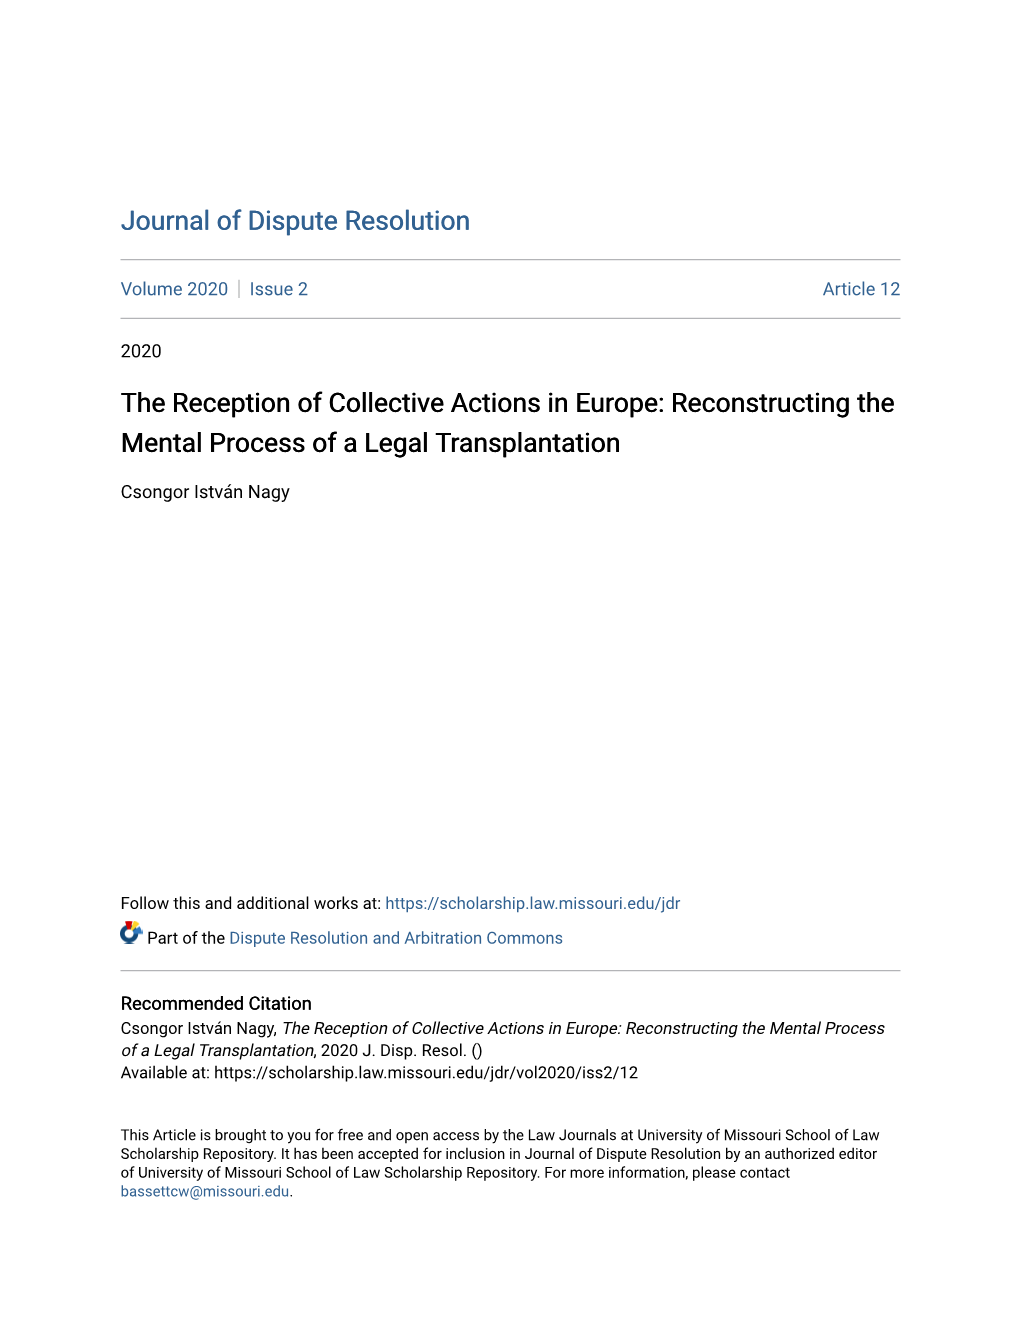 The Reception of Collective Actions in Europe: Reconstructing the Mental Process of a Legal Transplantation